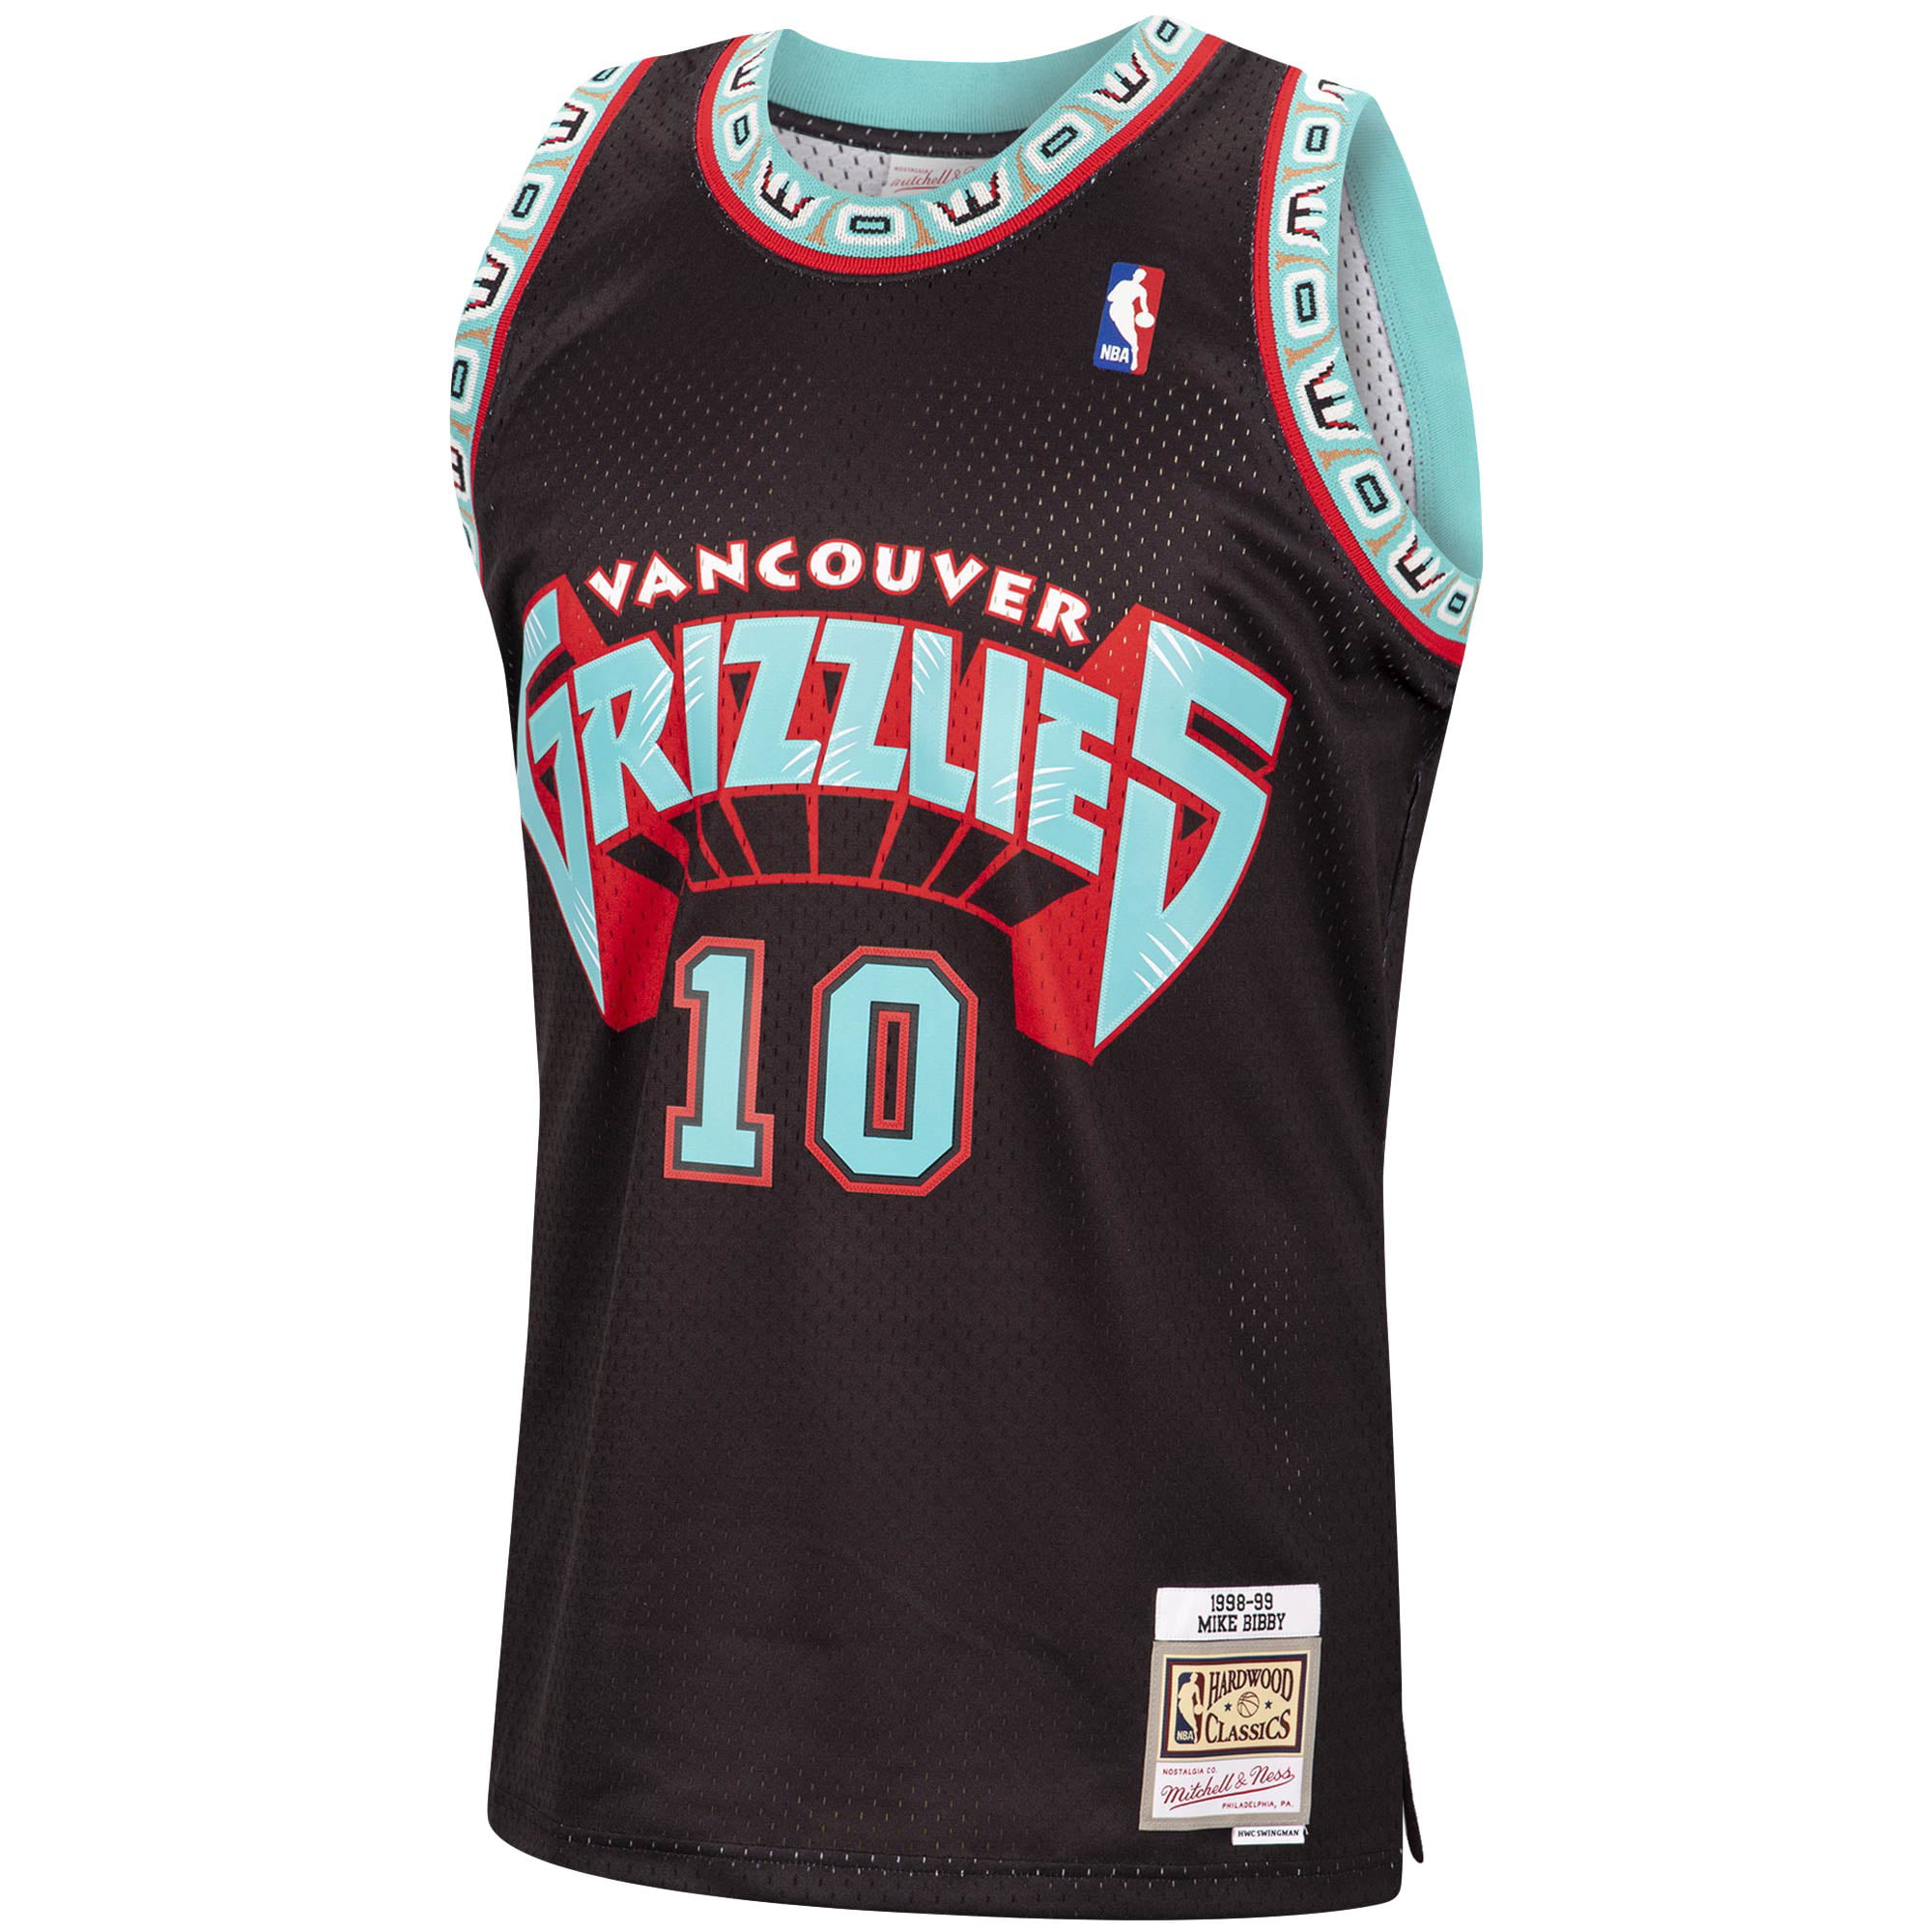 Vancouver Grizzlies Mike Bibby 98-99 Red Mitchell & Ness Men’s Reload Swingman Jersey